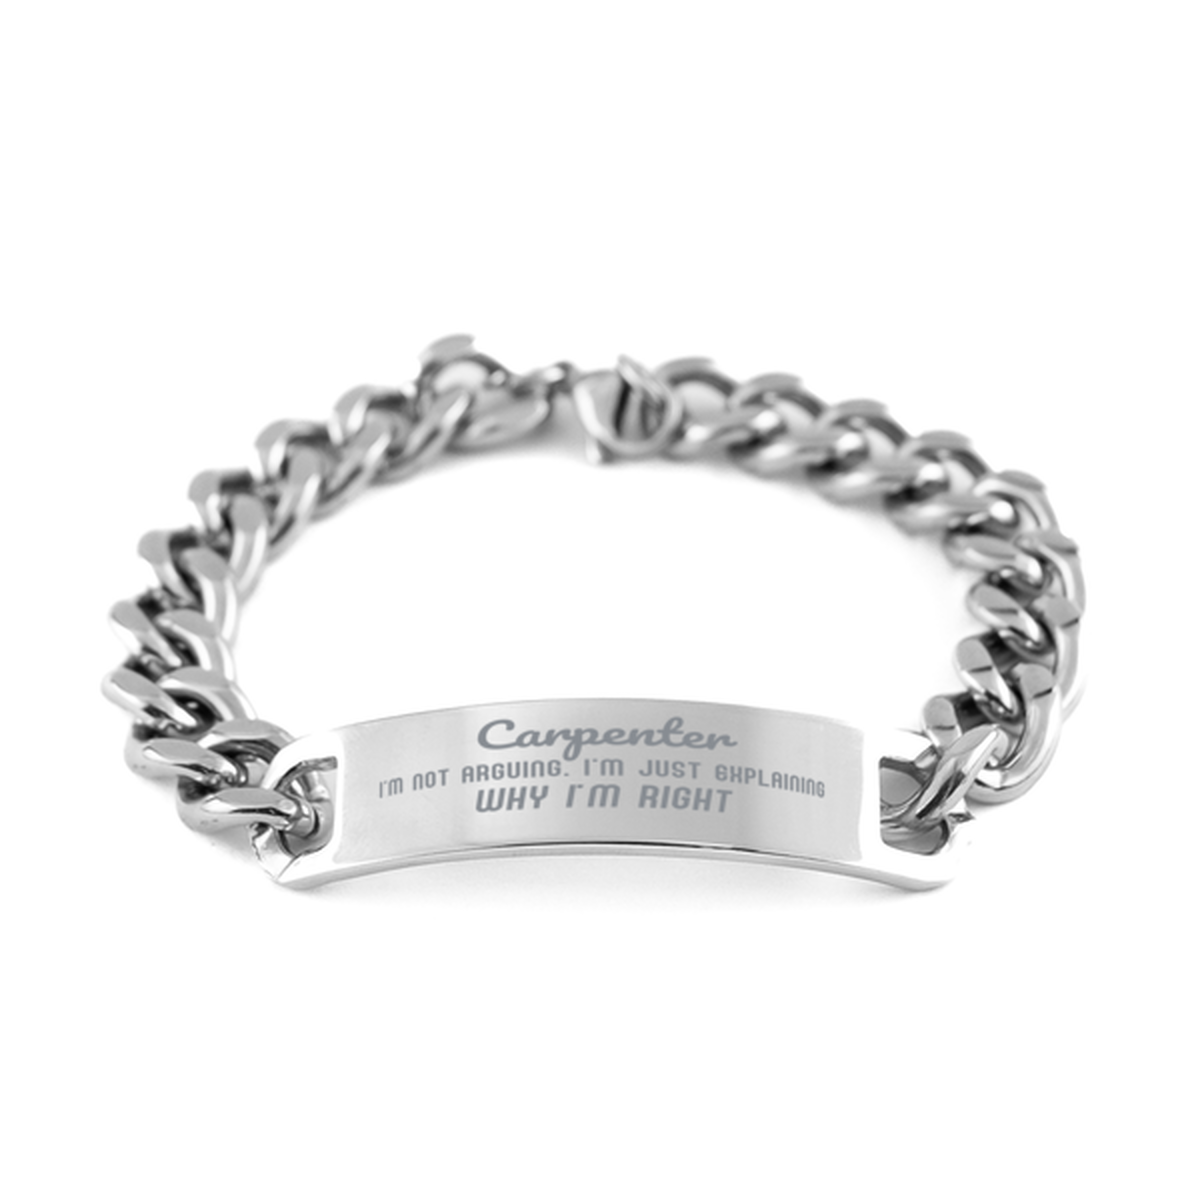 Carpenter I'm not Arguing. I'm Just Explaining Why I'm RIGHT Cuban Chain Stainless Steel Bracelet, Graduation Birthday Christmas Carpenter Gifts For Carpenter Funny Saying Quote Present for Men Women Coworker